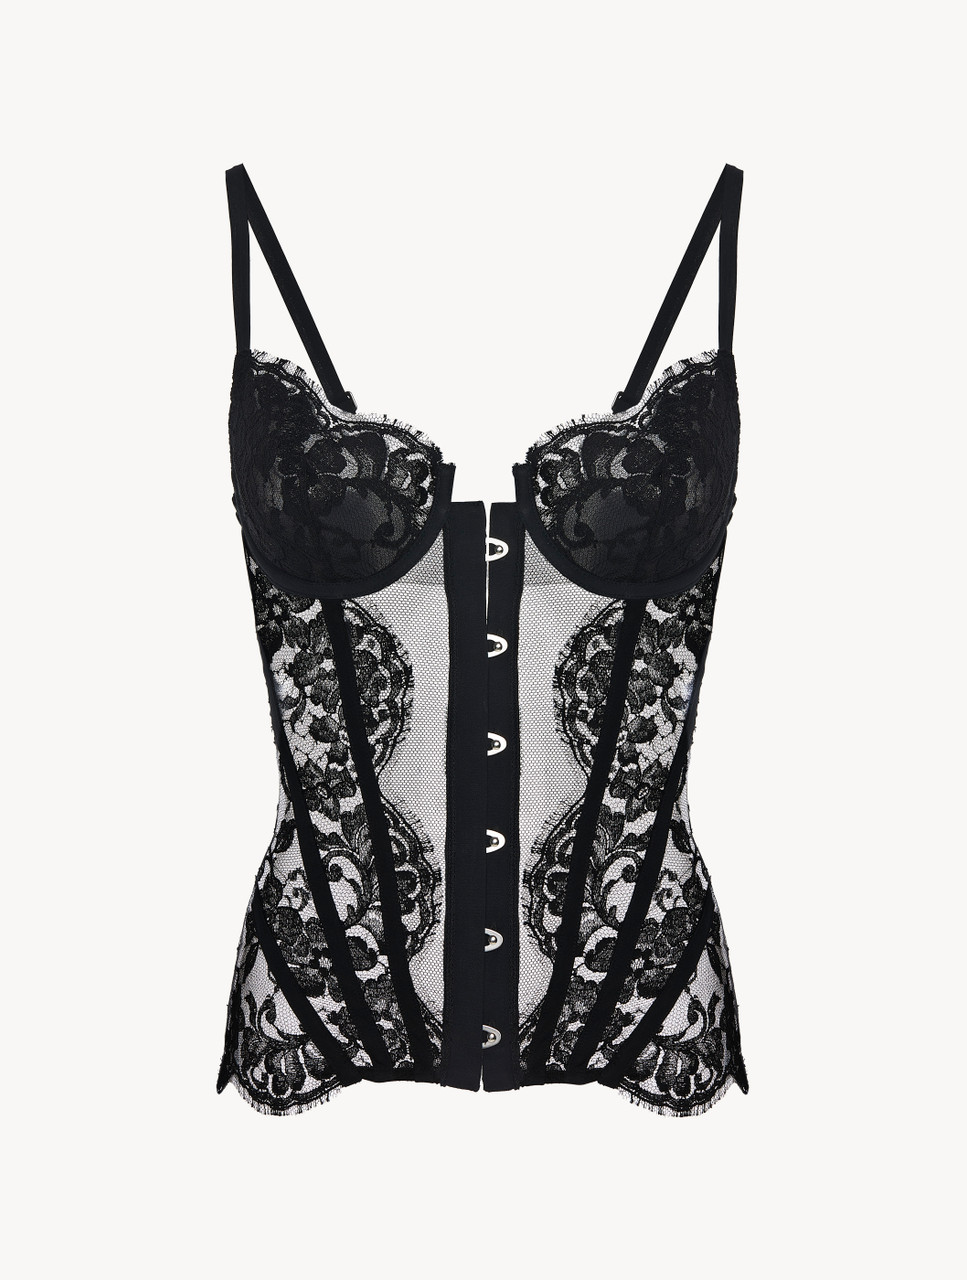 Corset in black Leavers lace